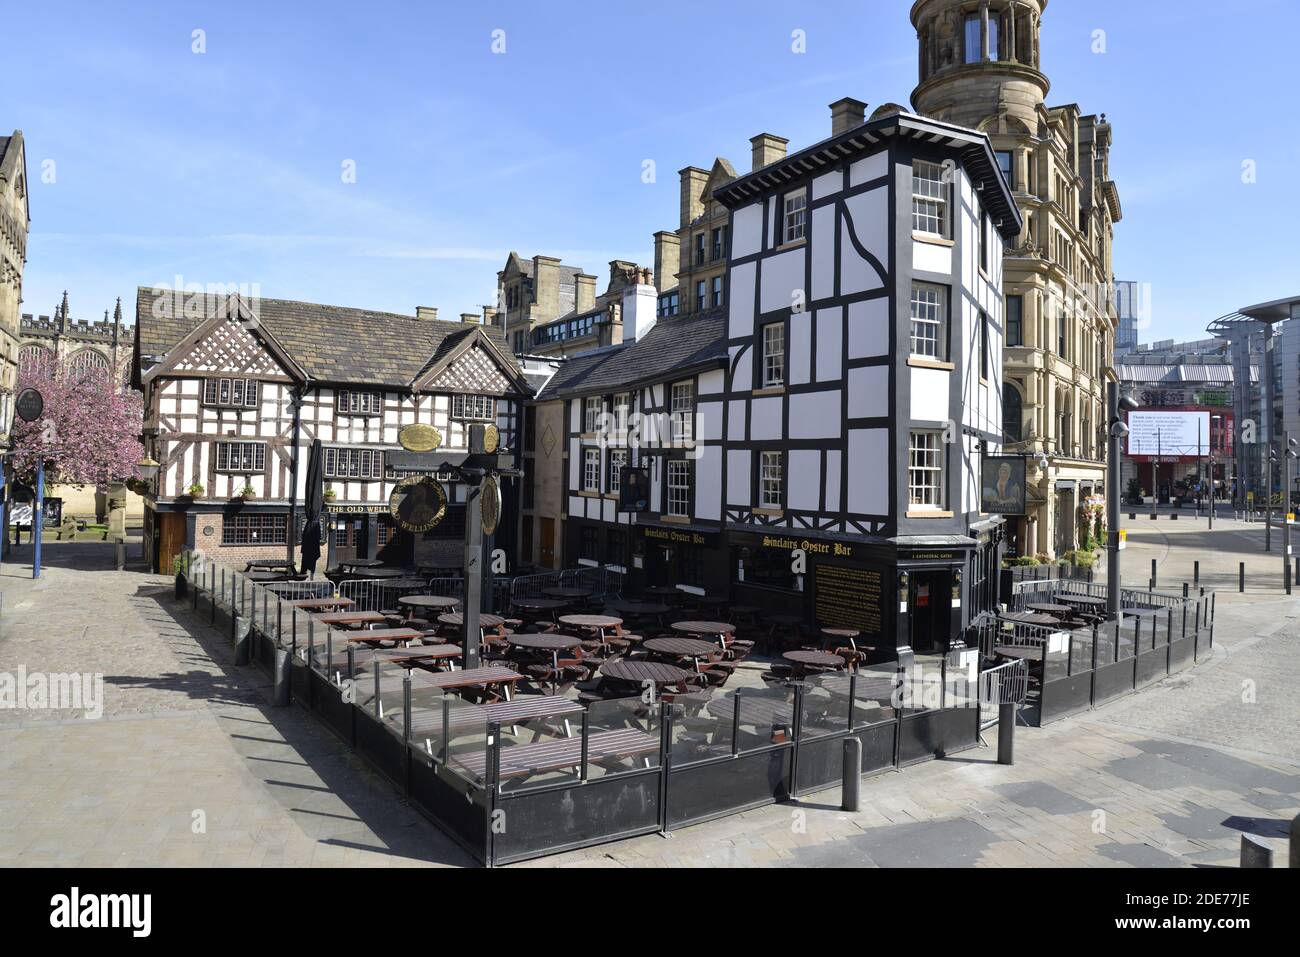 Sinclair's Oyster Bar, Shambles Square, Manchester Stock Photo